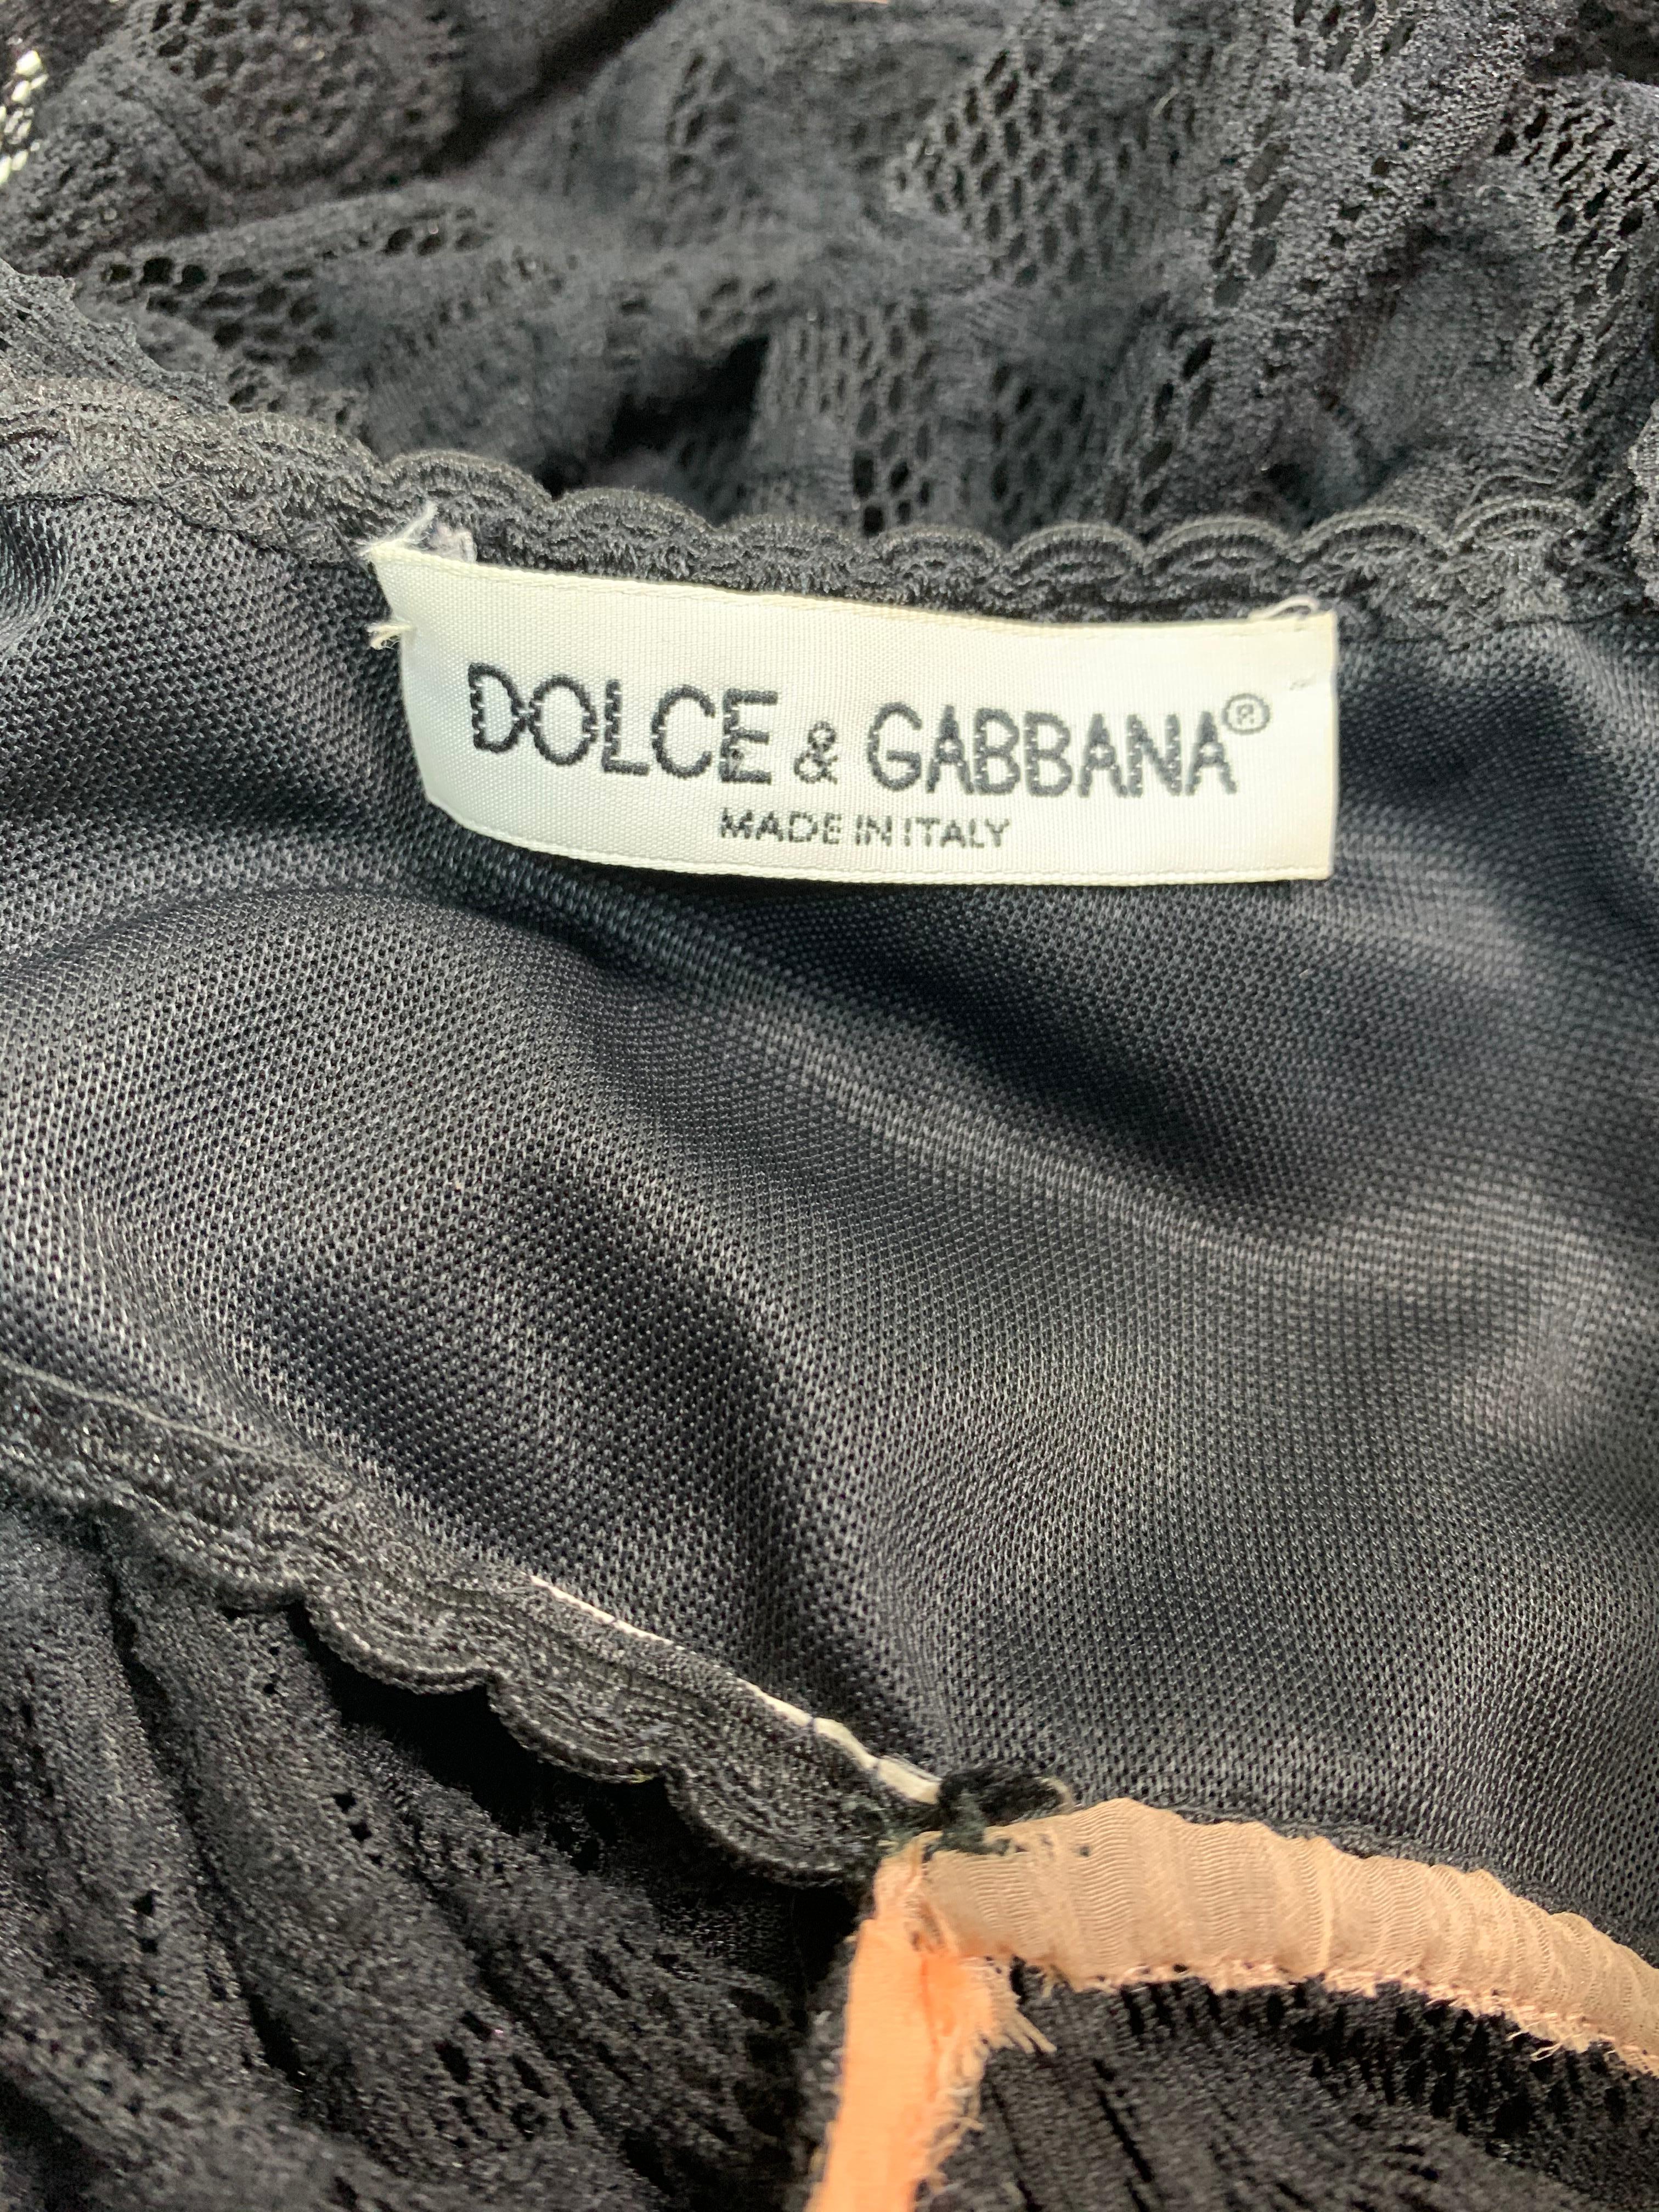 1996 Dolce & Gabbana Sheer Black Lace Cut-Out Bra Gown Dress In Good Condition In Yukon, OK